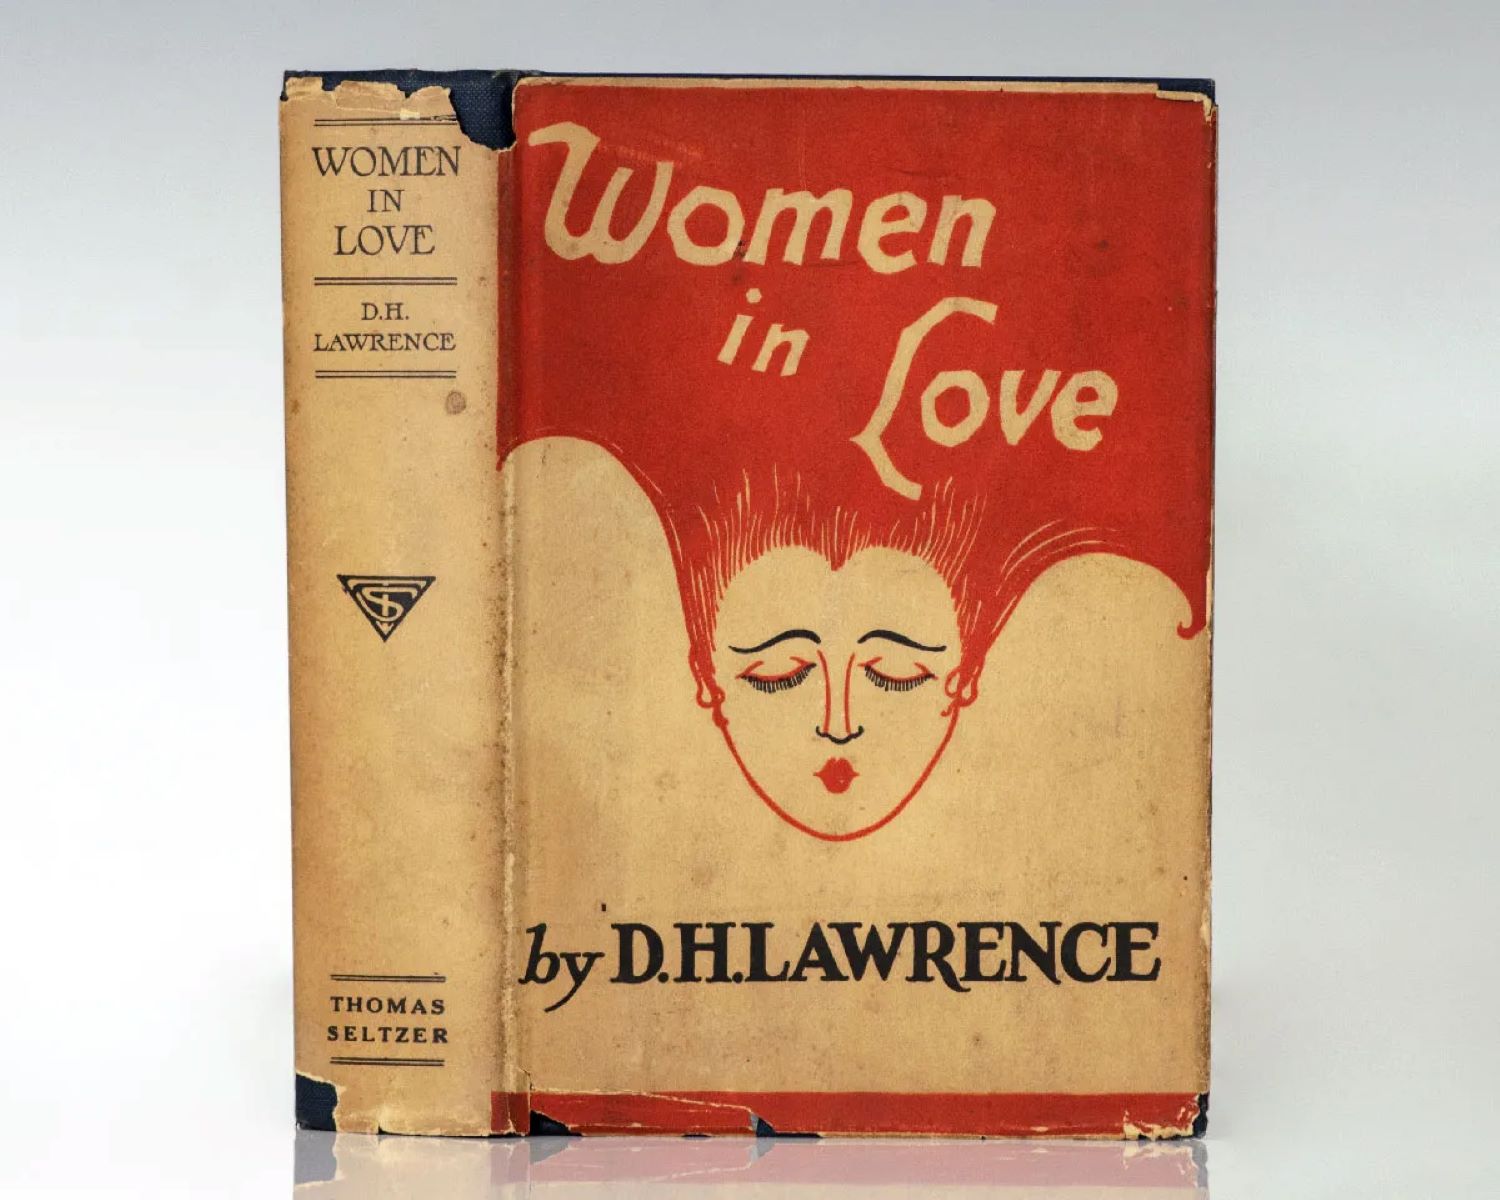 19-mind-blowing-facts-about-women-in-love-d-h-lawrence